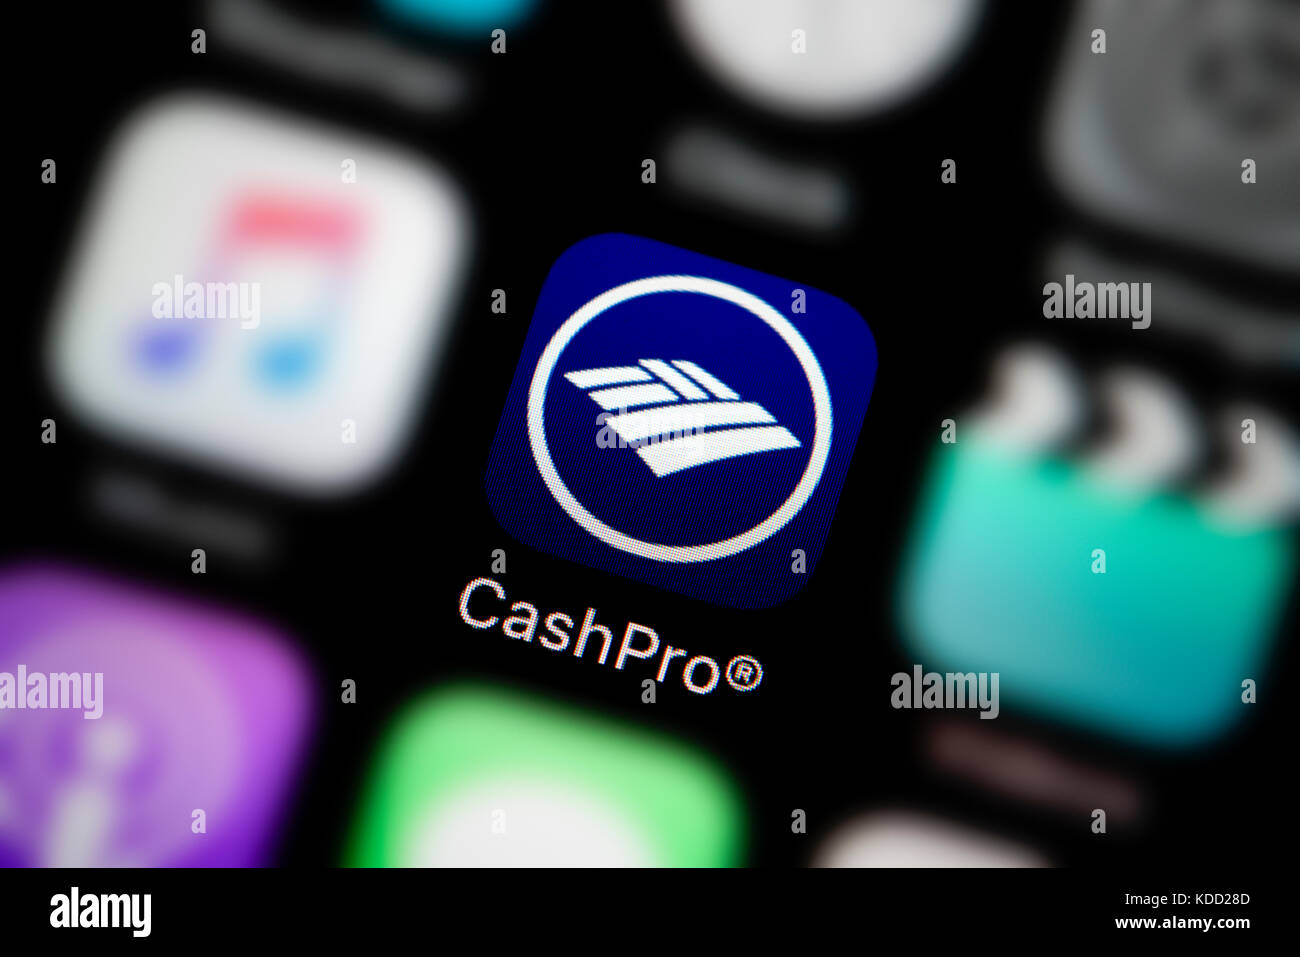 A close-up shot of the logo representing Bank of America CashPro app icon, as seen on the screen of a smart phone (Editorial use only) Stock Photo